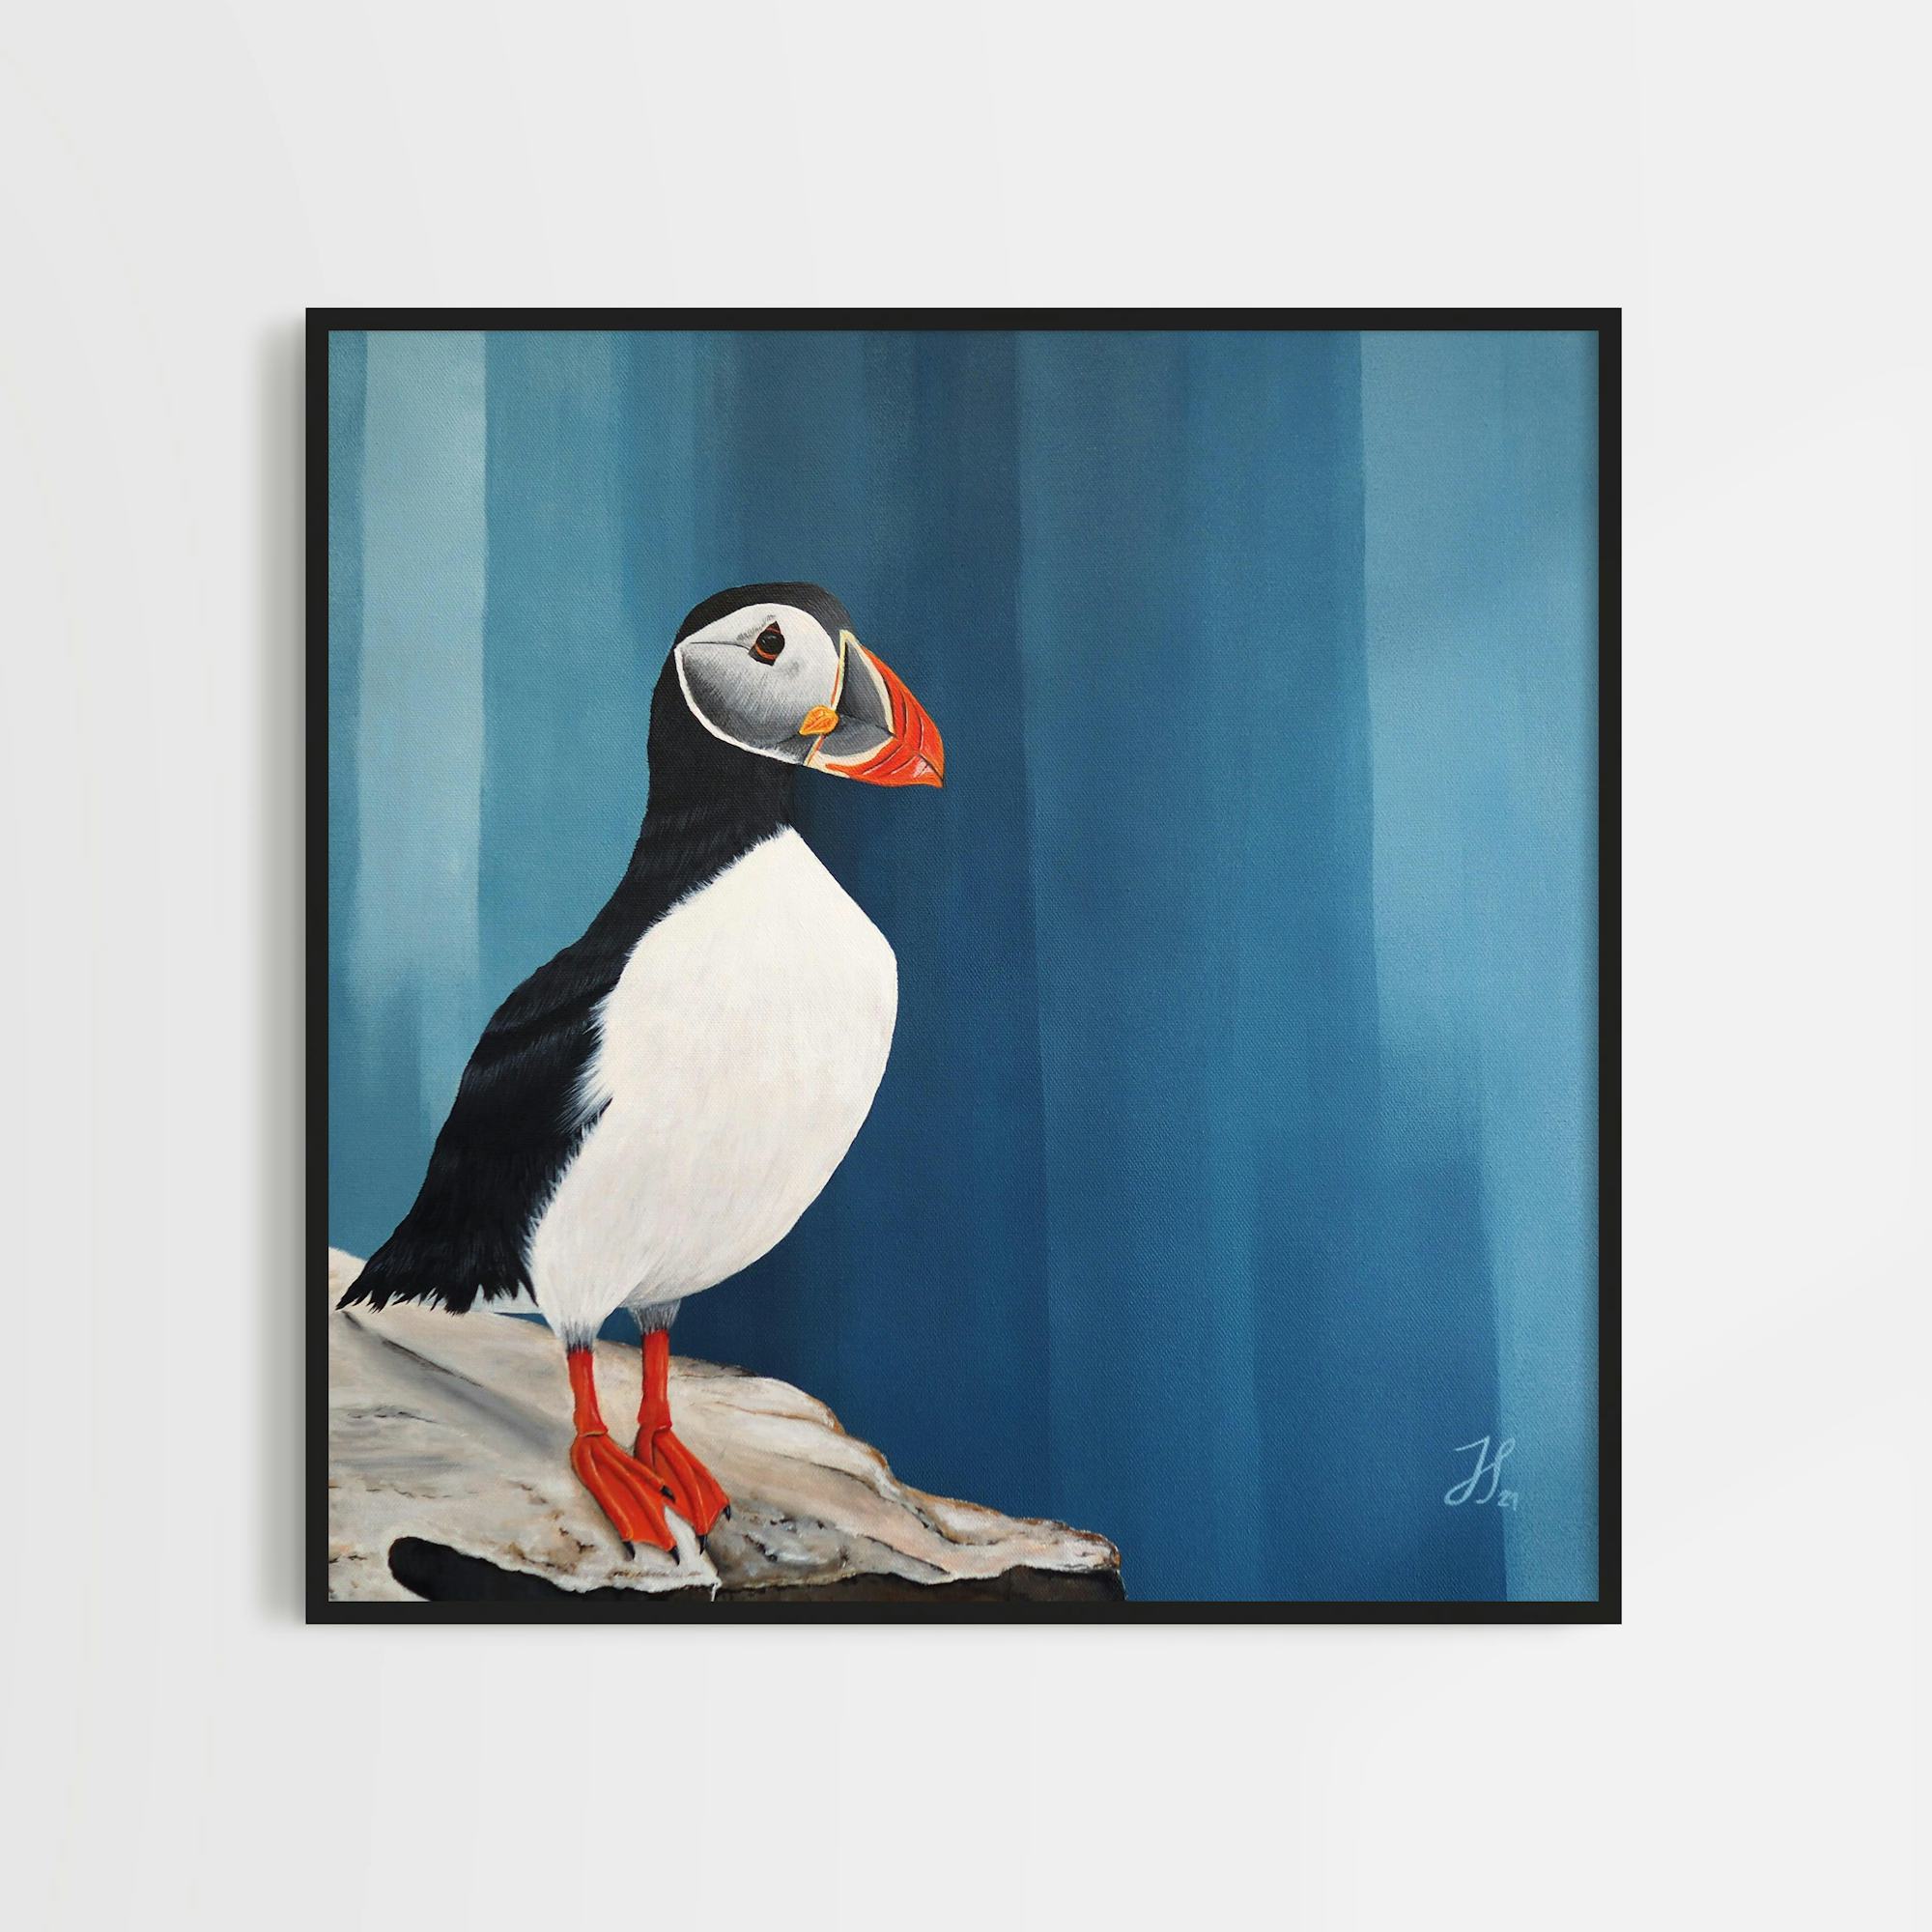 Framed, original painting of a puffin from the Shetland Islands painting with acrylics on canvas.